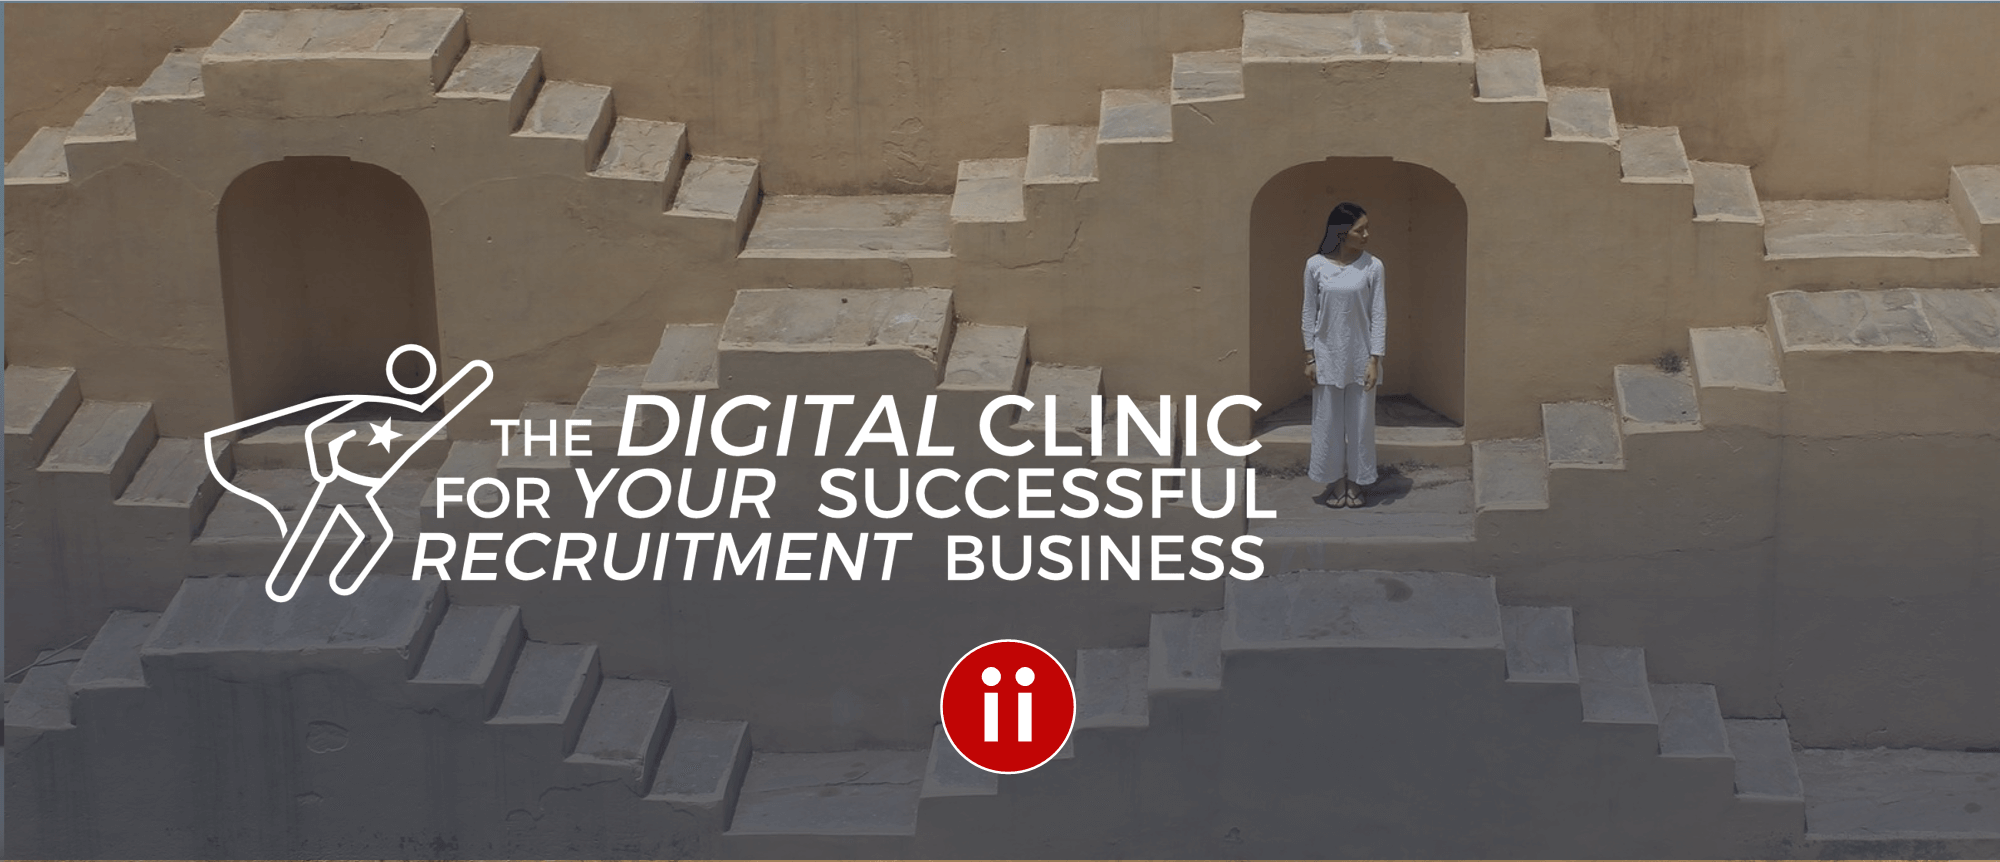 The Digital Clinic for Recruitment Business - HEADER